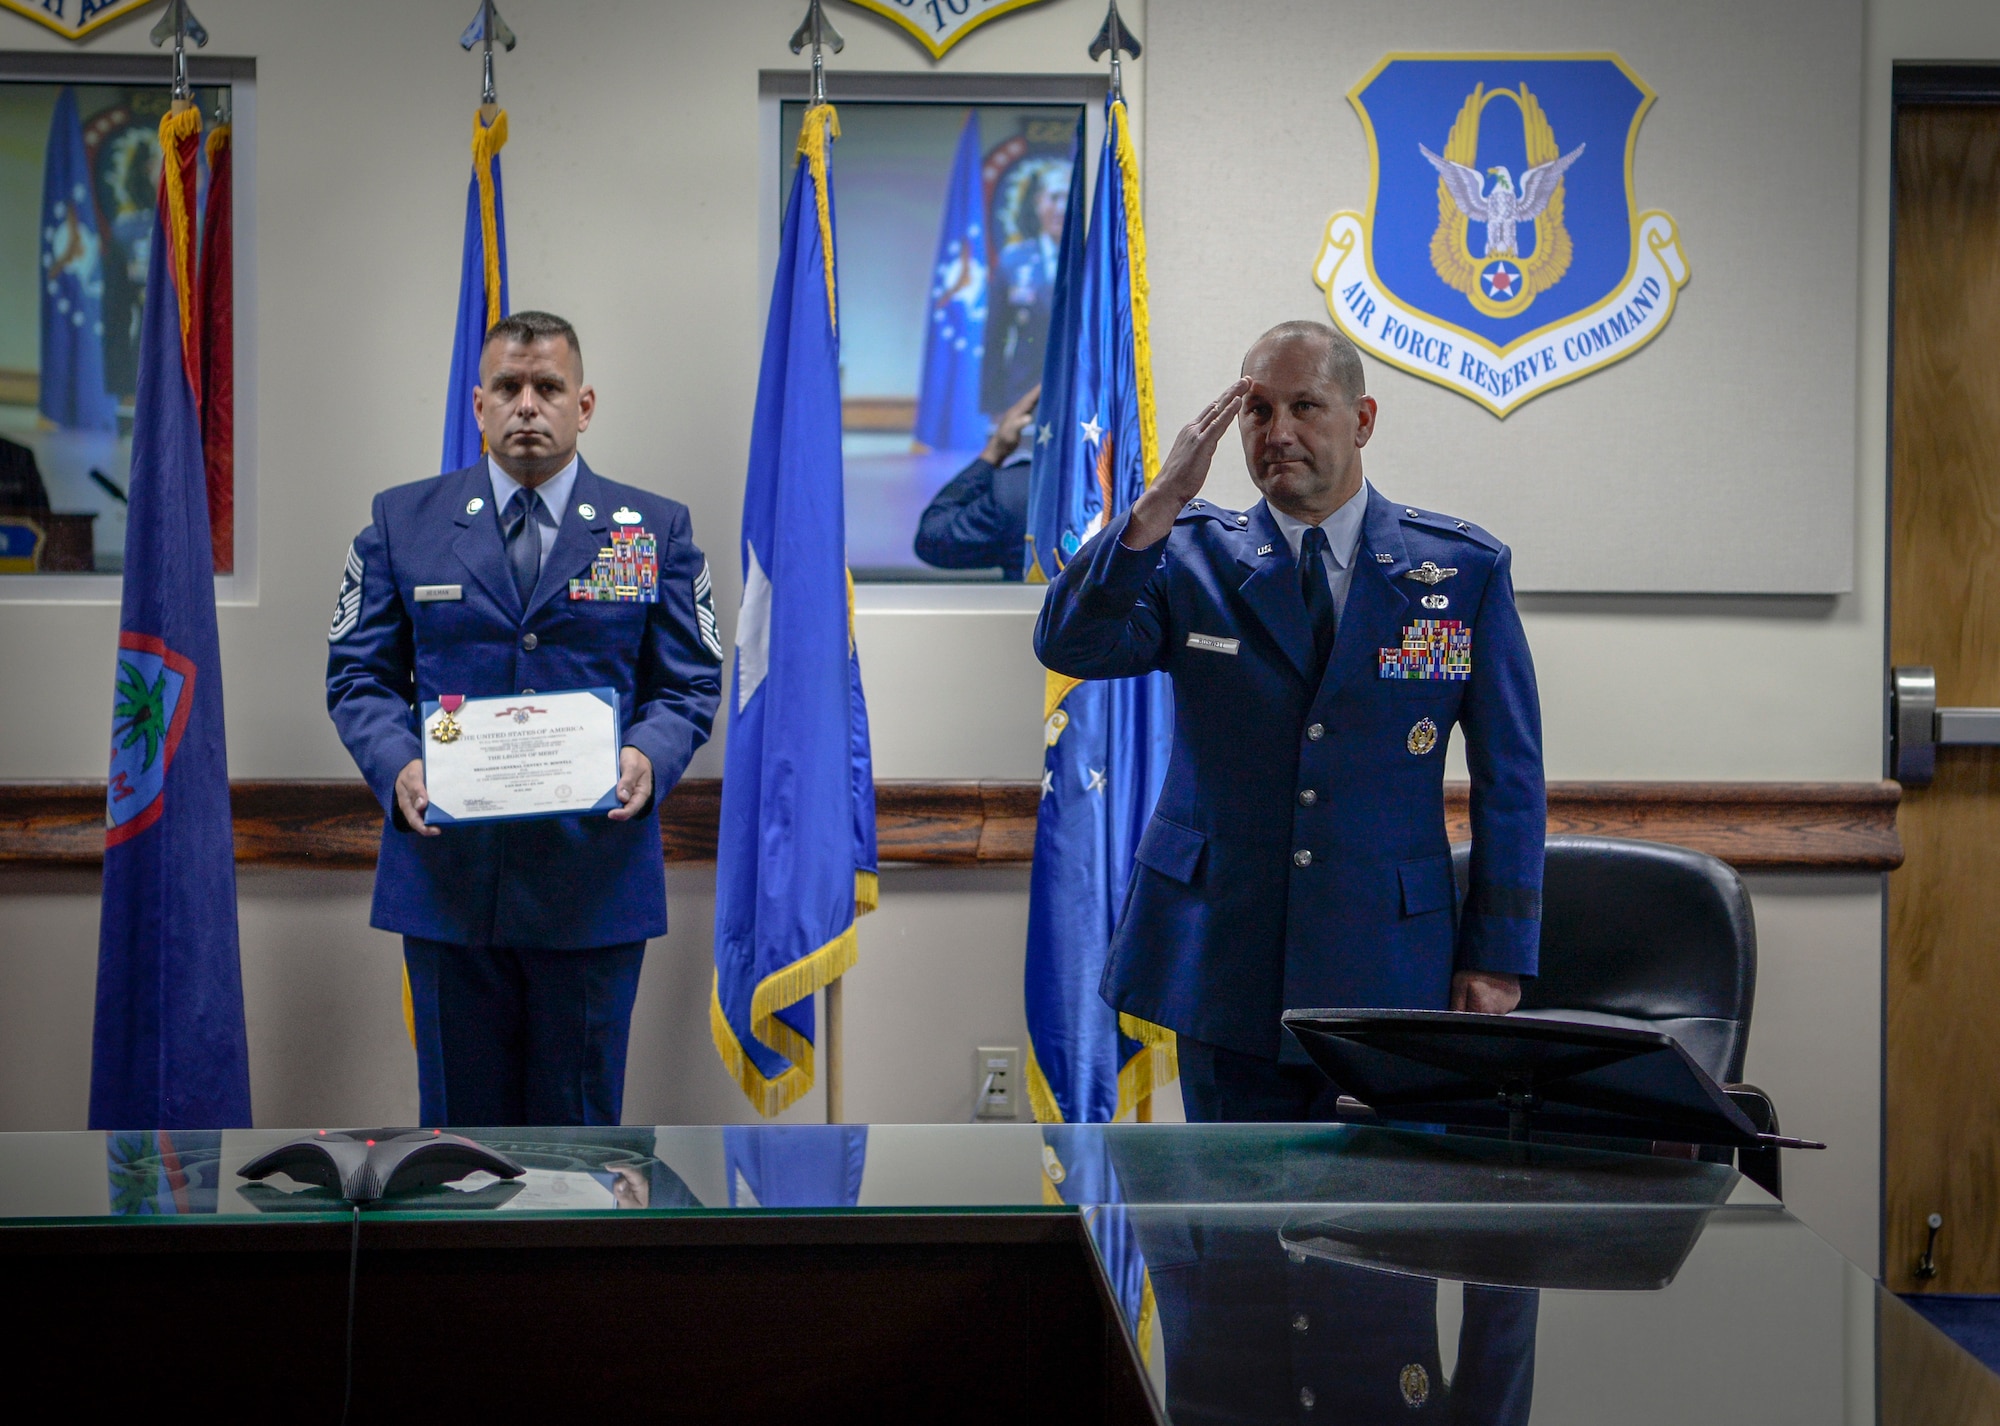 U.S. Air Force Brig. Gen. Gentry W. Boswell is awarded the Legion of Merit during a change of command ceremony July 8, 2020, at Andersen Air Force Base, Guam.